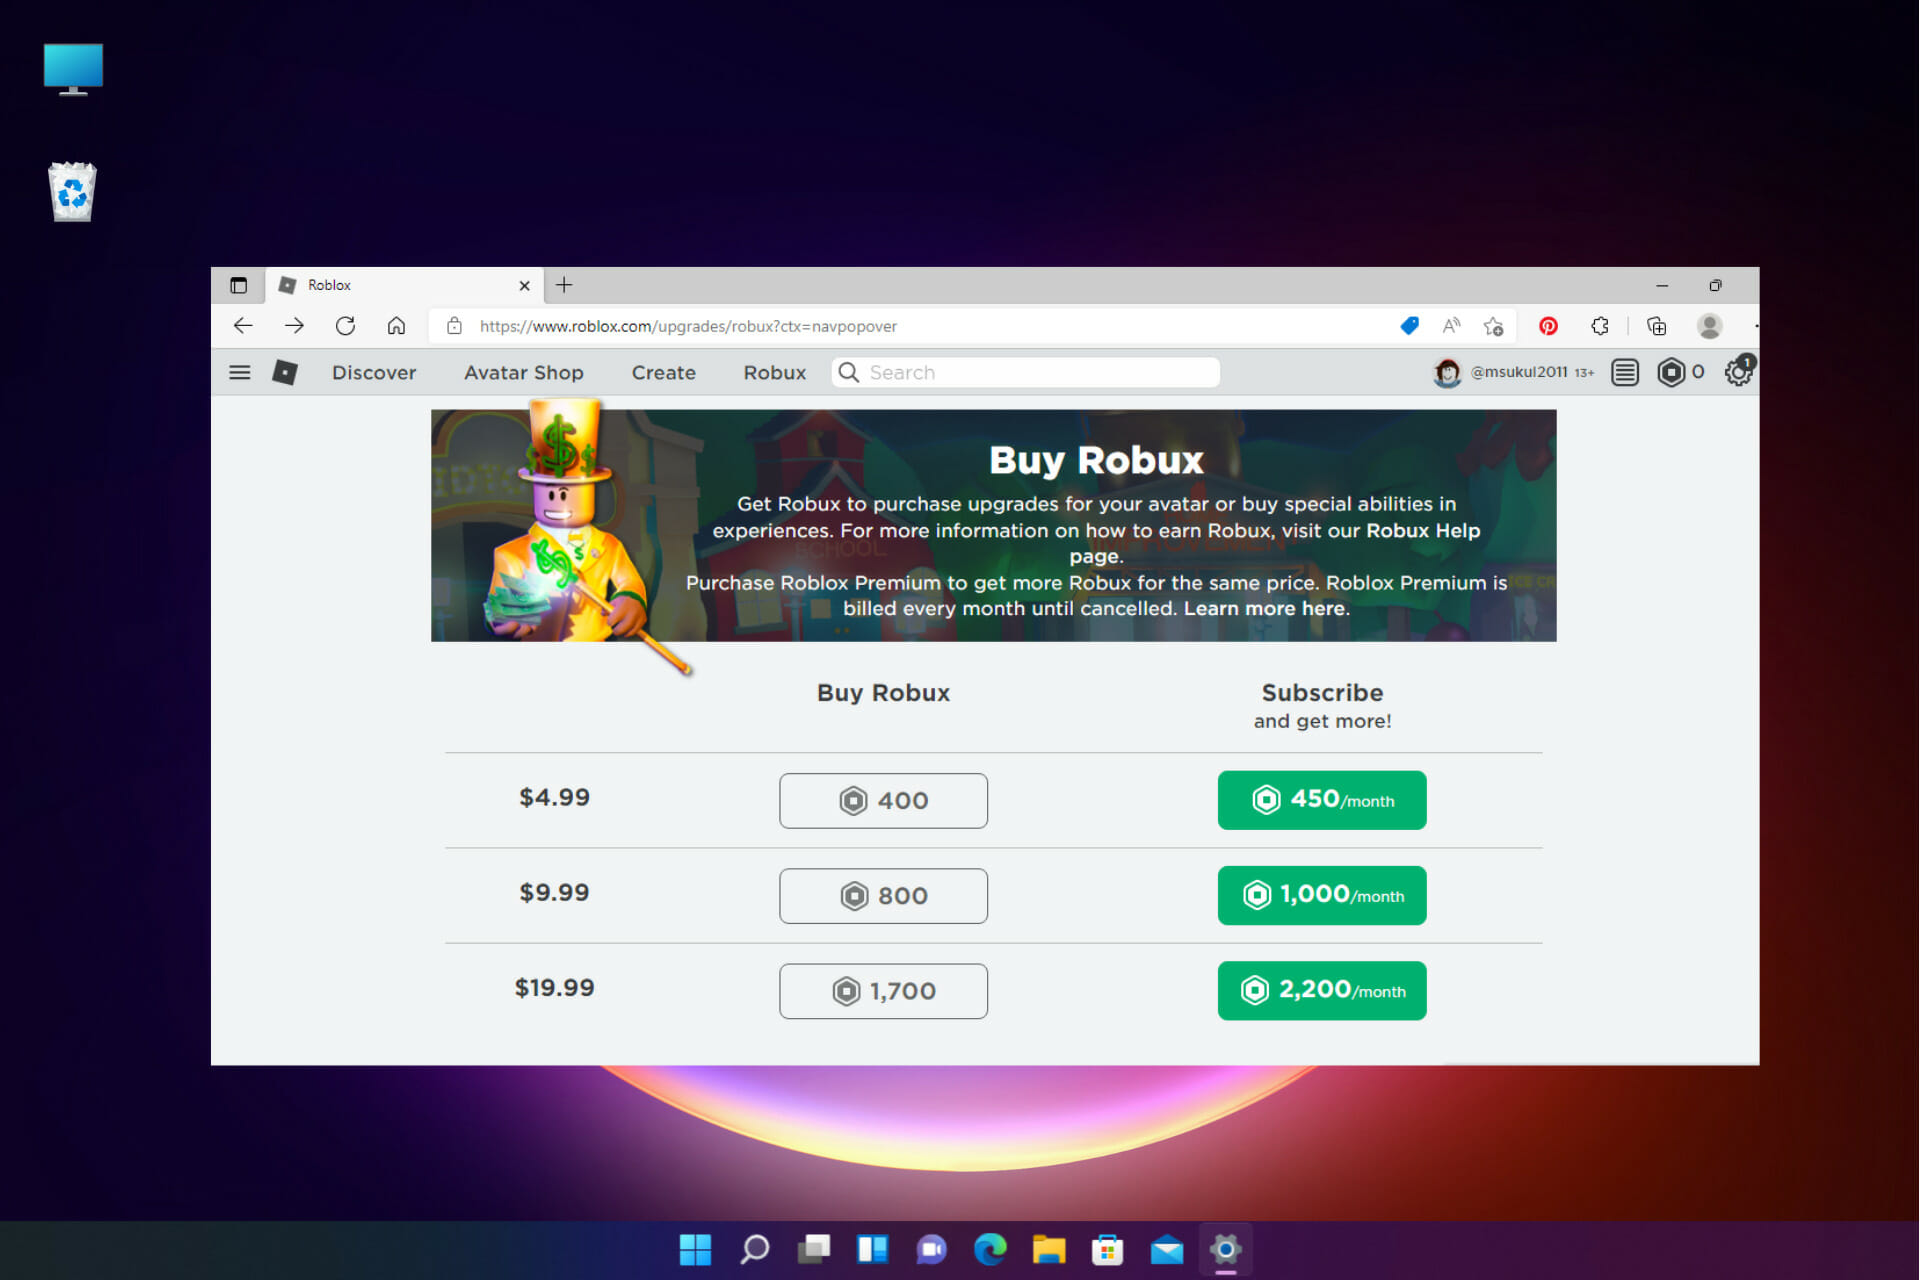 Buy Roblox subscription from Roblox game app